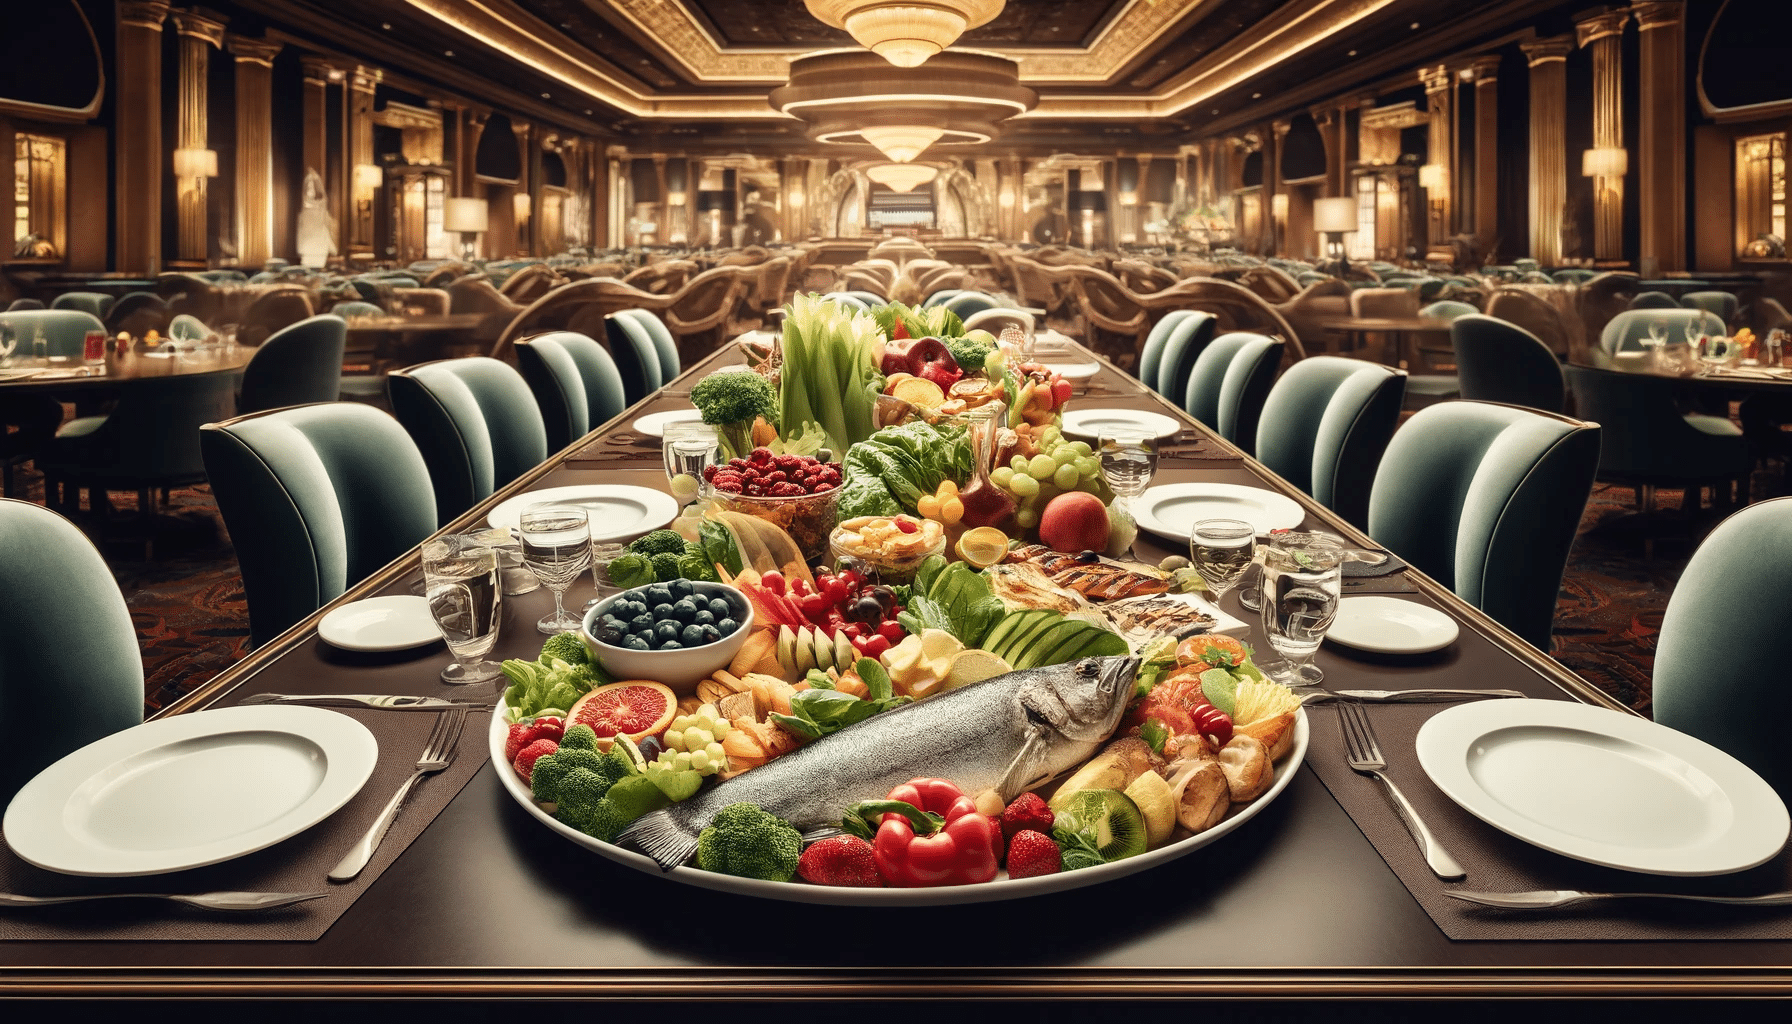 Healthy Eating Options at Casinos